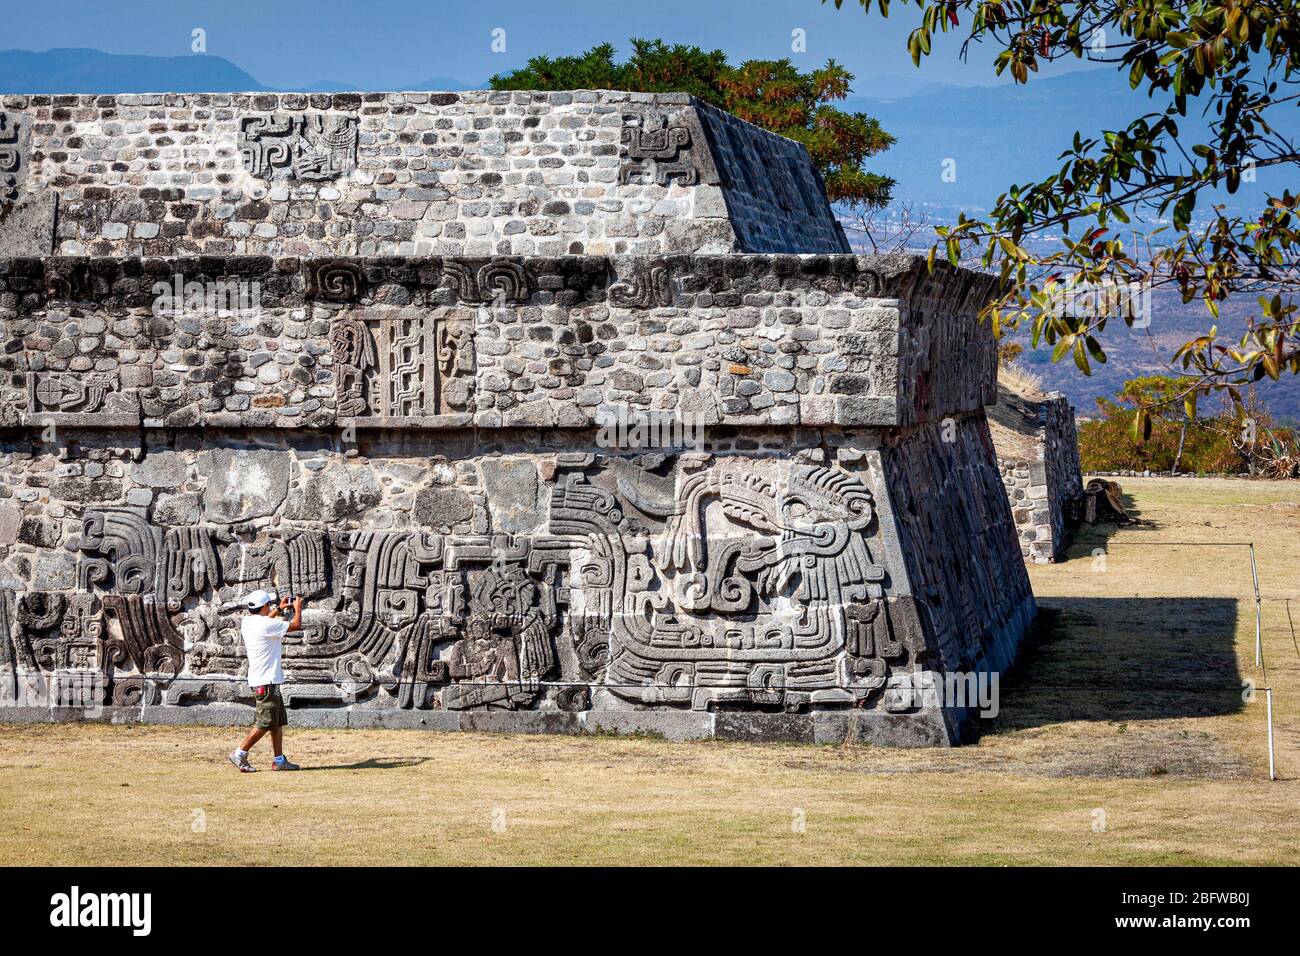 A young man photographs the Pyramid of the Feathered Serpents at the Xochicalco ruins, Morelos, Mexico. Stock Photo